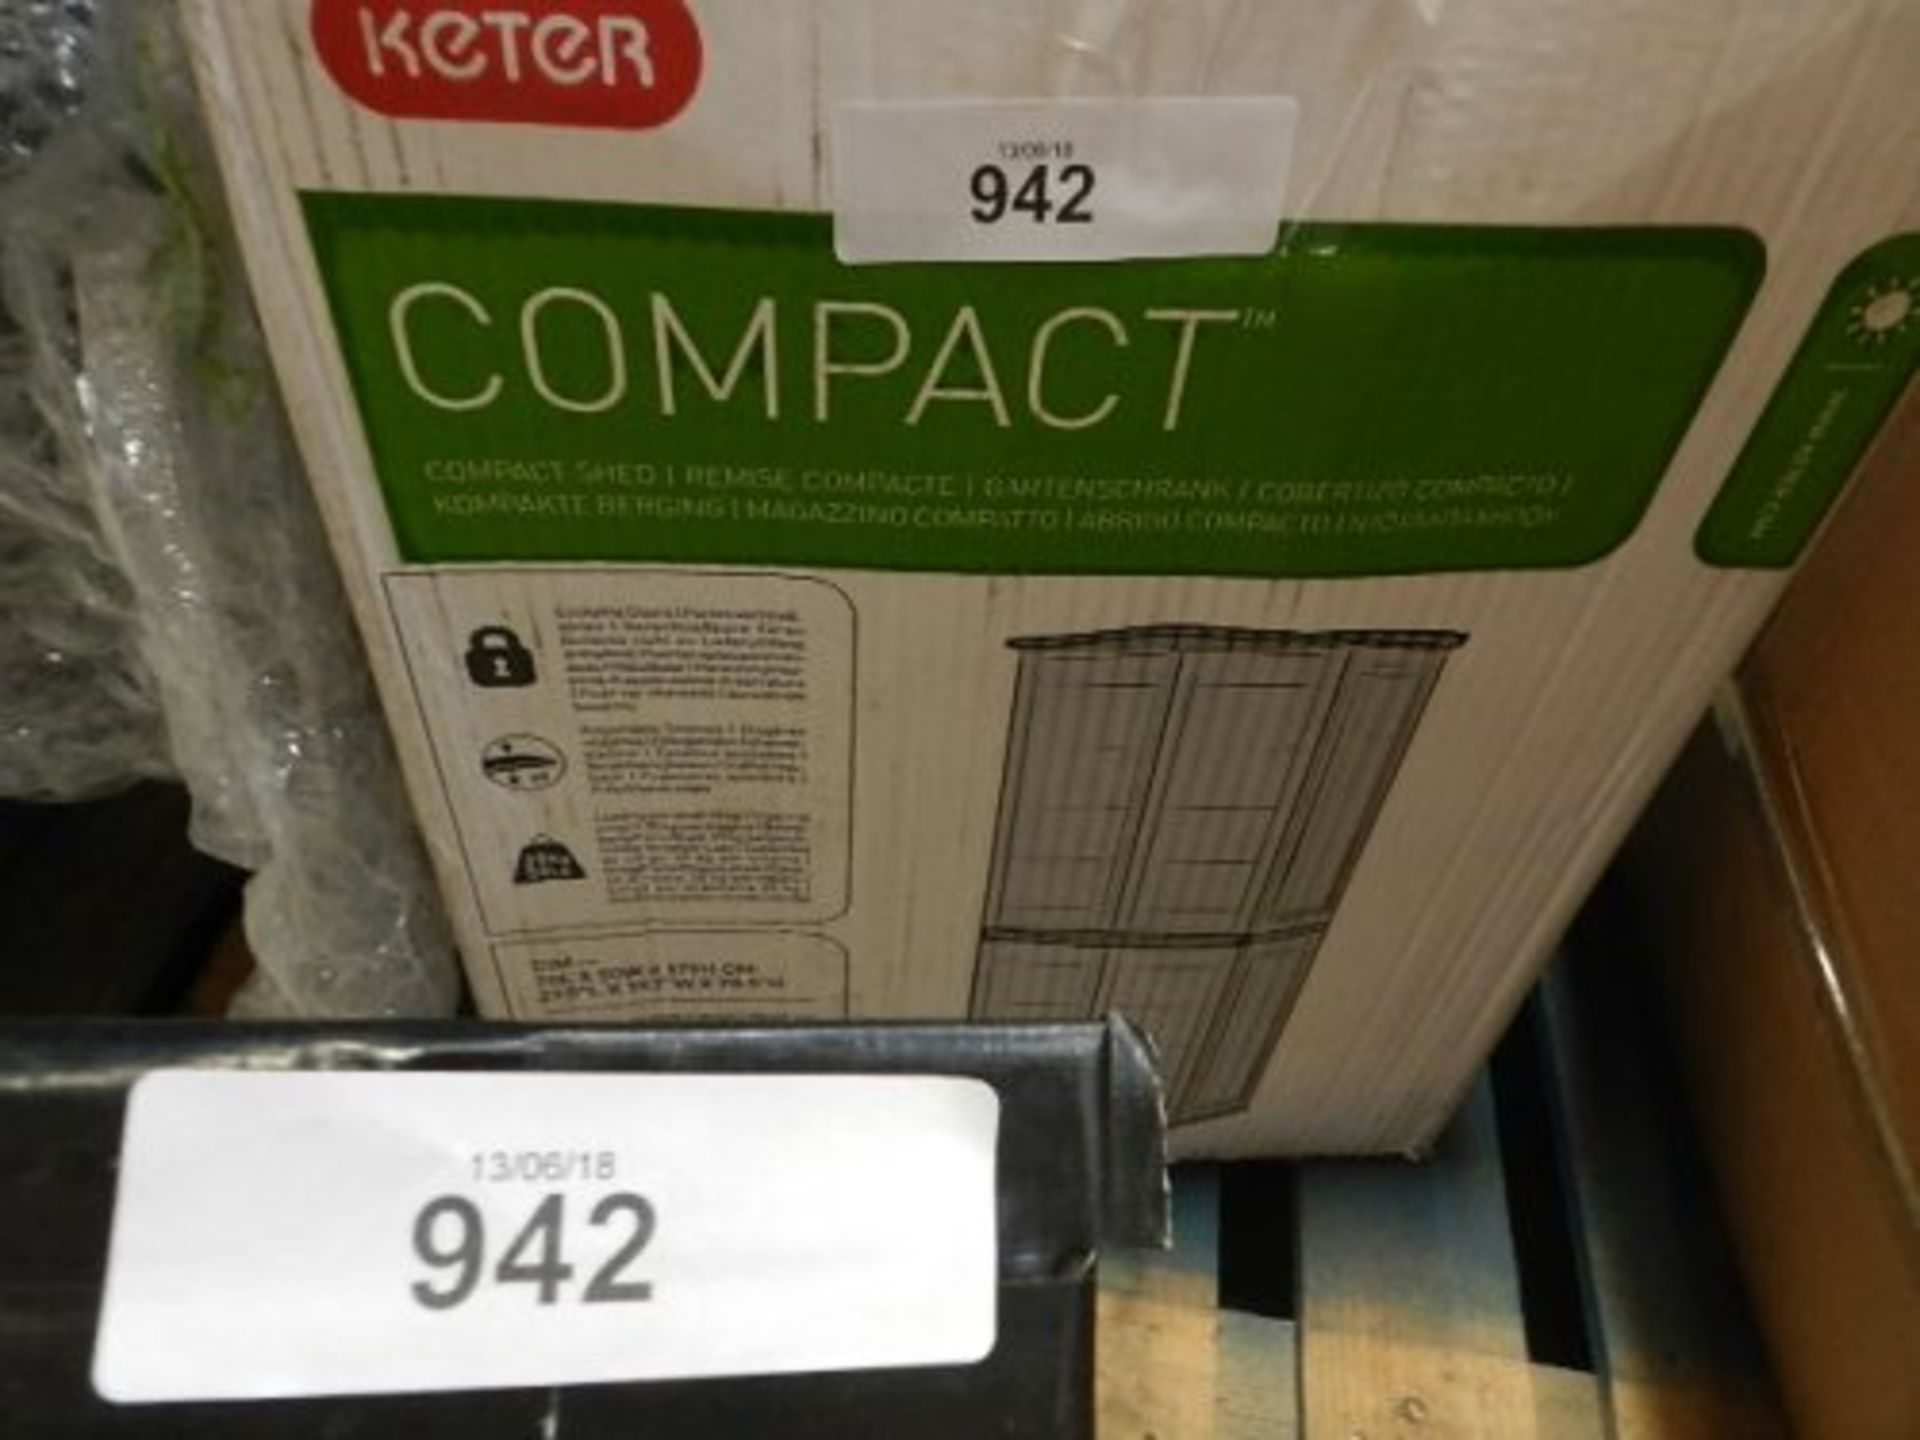 1 x Keter compact shed/storage unit, size 179cm(H) x 70cm(W) x 50cm(D) - New in box (R2)